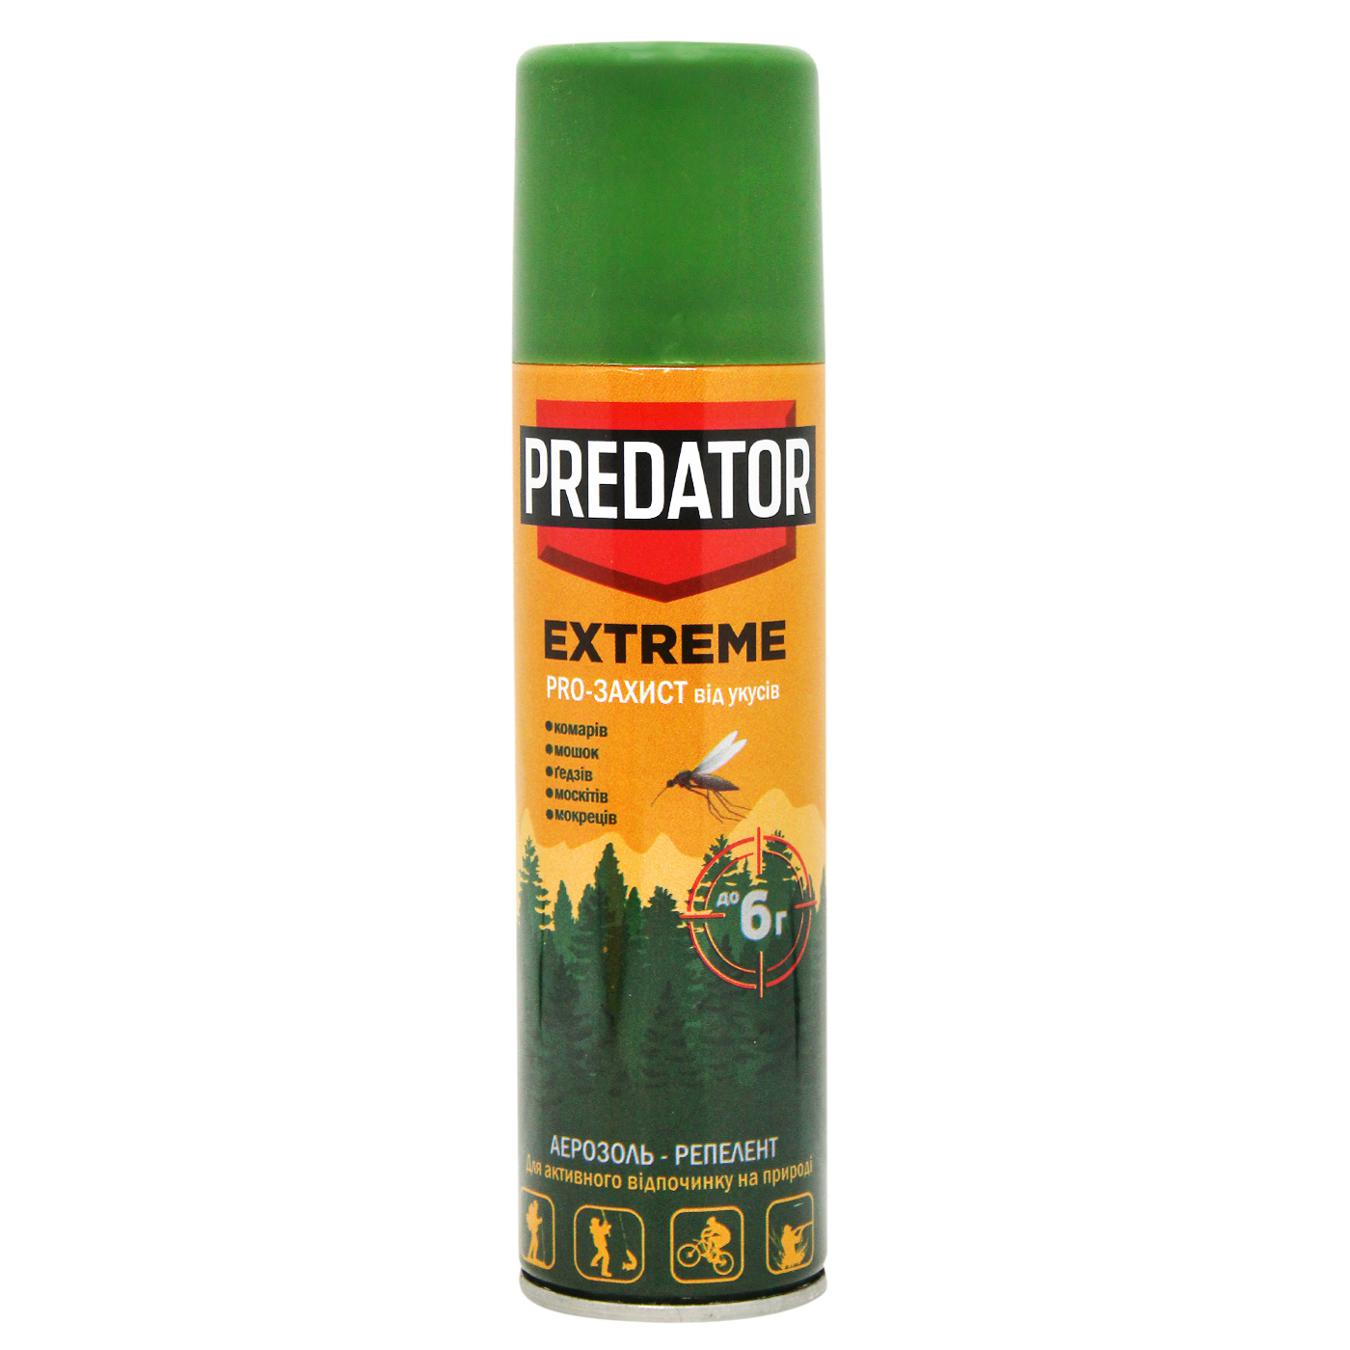 Aerosol Predator Extreme against mosquito and tick bites for up to 6 hours 150 ml